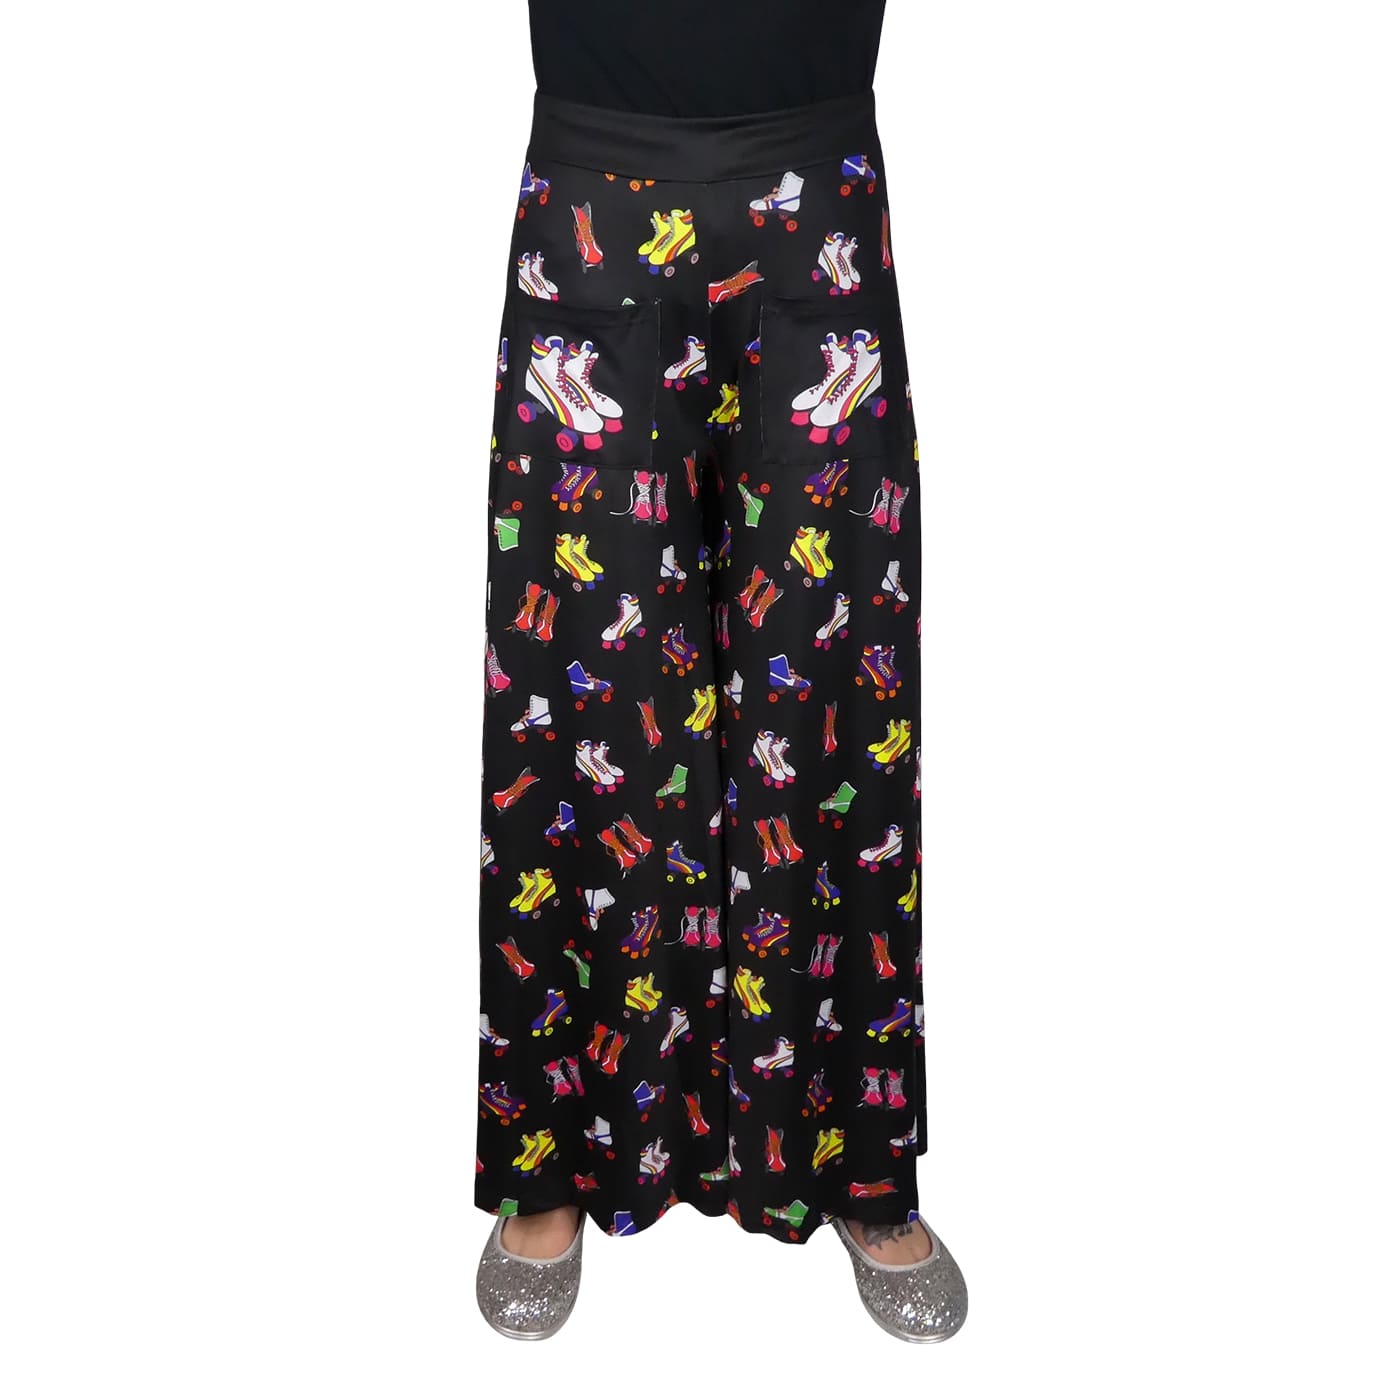 Retro Skates Wide Leg Pants by RainbowsAndFairies.com.au (Roller Skates - Roller Derby - Pants With Pockets - Pallzao Pants - Flares - Bell Bottoms) - SKU: CL_WIDEL_RETRO_ORG - Pic-01